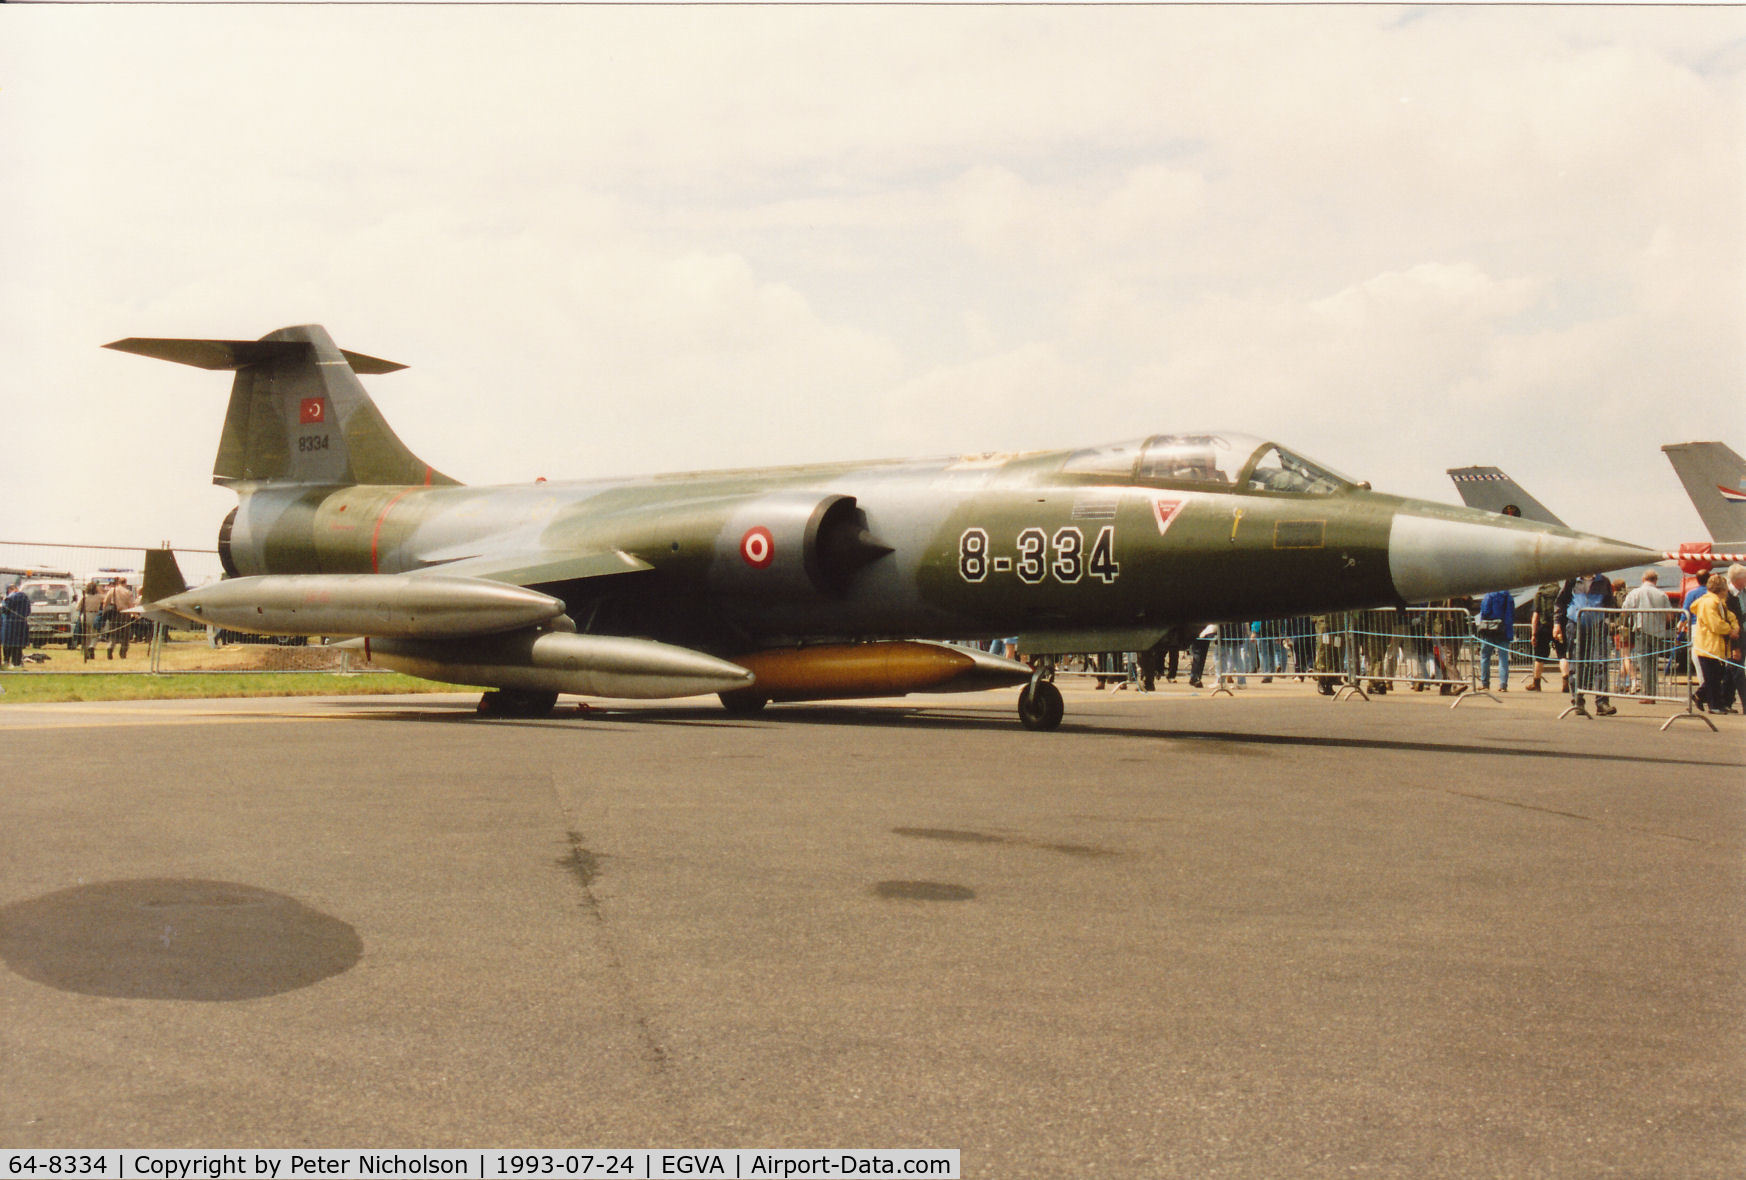 64-8334, 1964 Lockheed F-104G Starfighter C/N 683-8334, F-104G Starfighter of 181 Filo Turkish Air Force on display at the 1993 Intnl Air Tattoo at RAF Fairford.